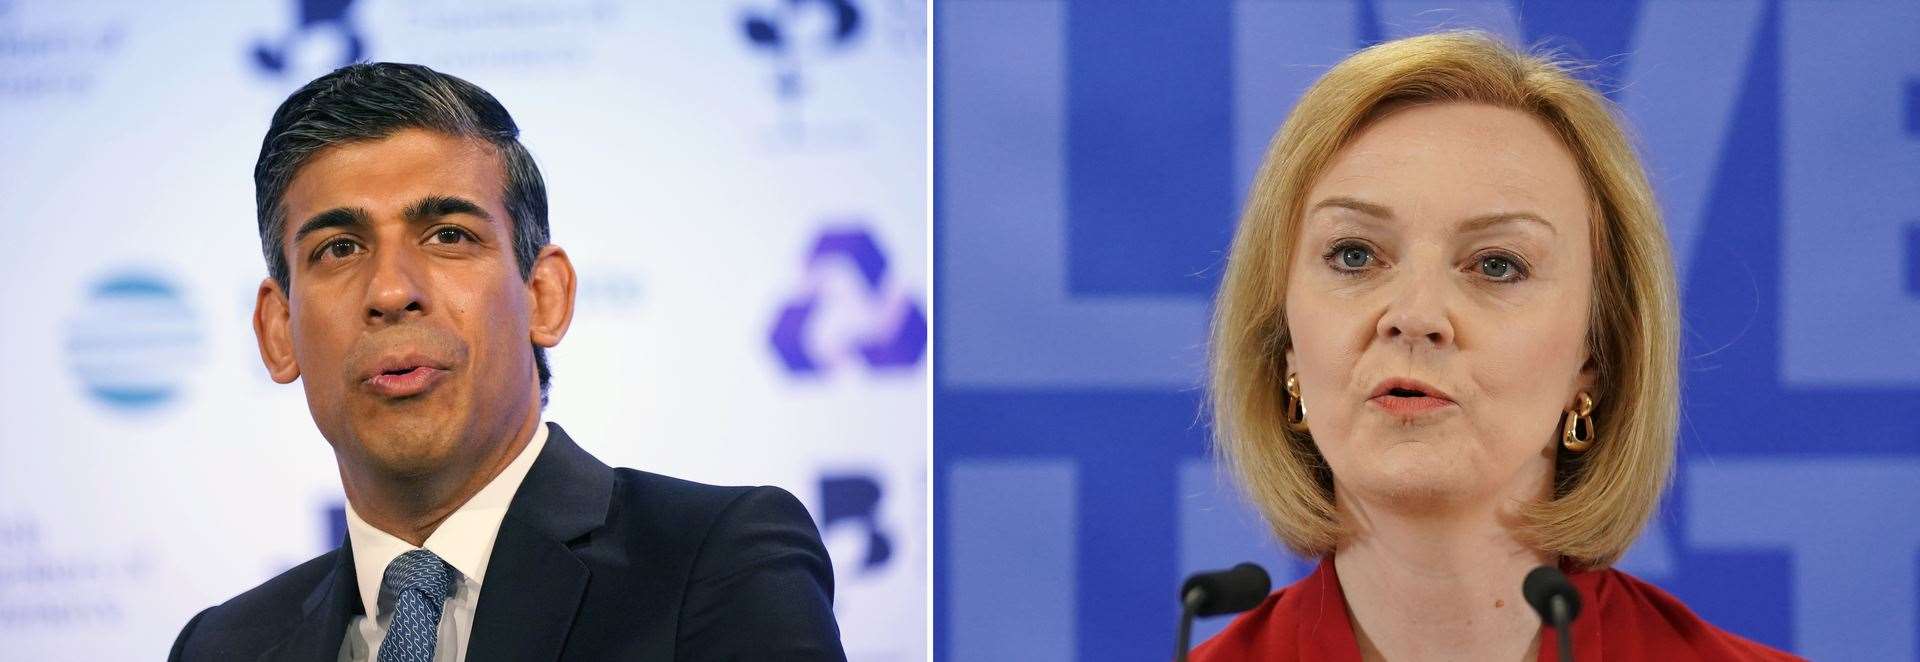 Either Rishi Sunak or Liz Truss will be the next prime minister (PA)